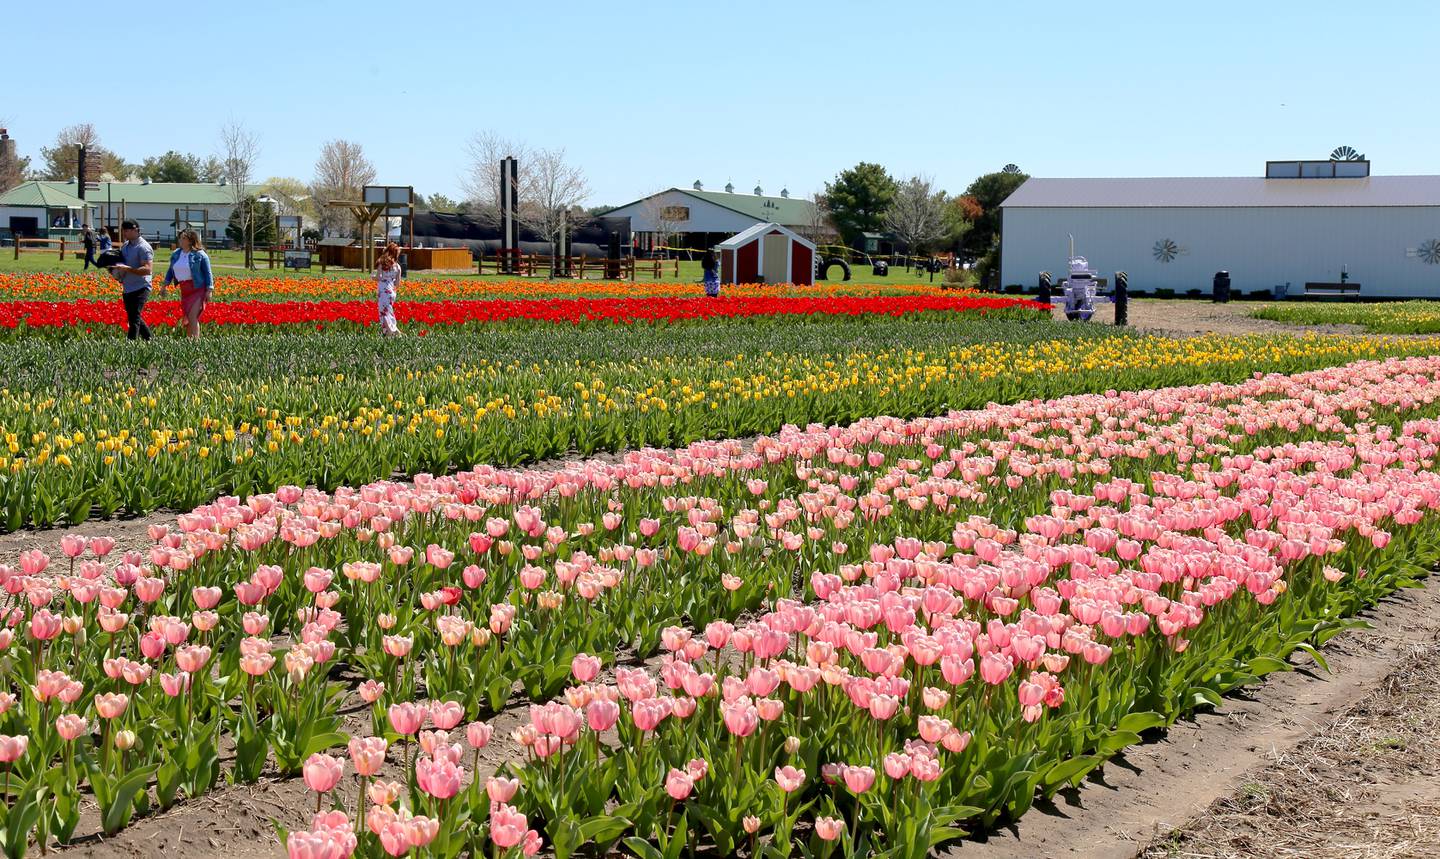 People enjoy the many different colored tulips at the first ever Tulip Fest at Kuiper’s Family Farm in Maple Park on Saturday, May 7, 2022.